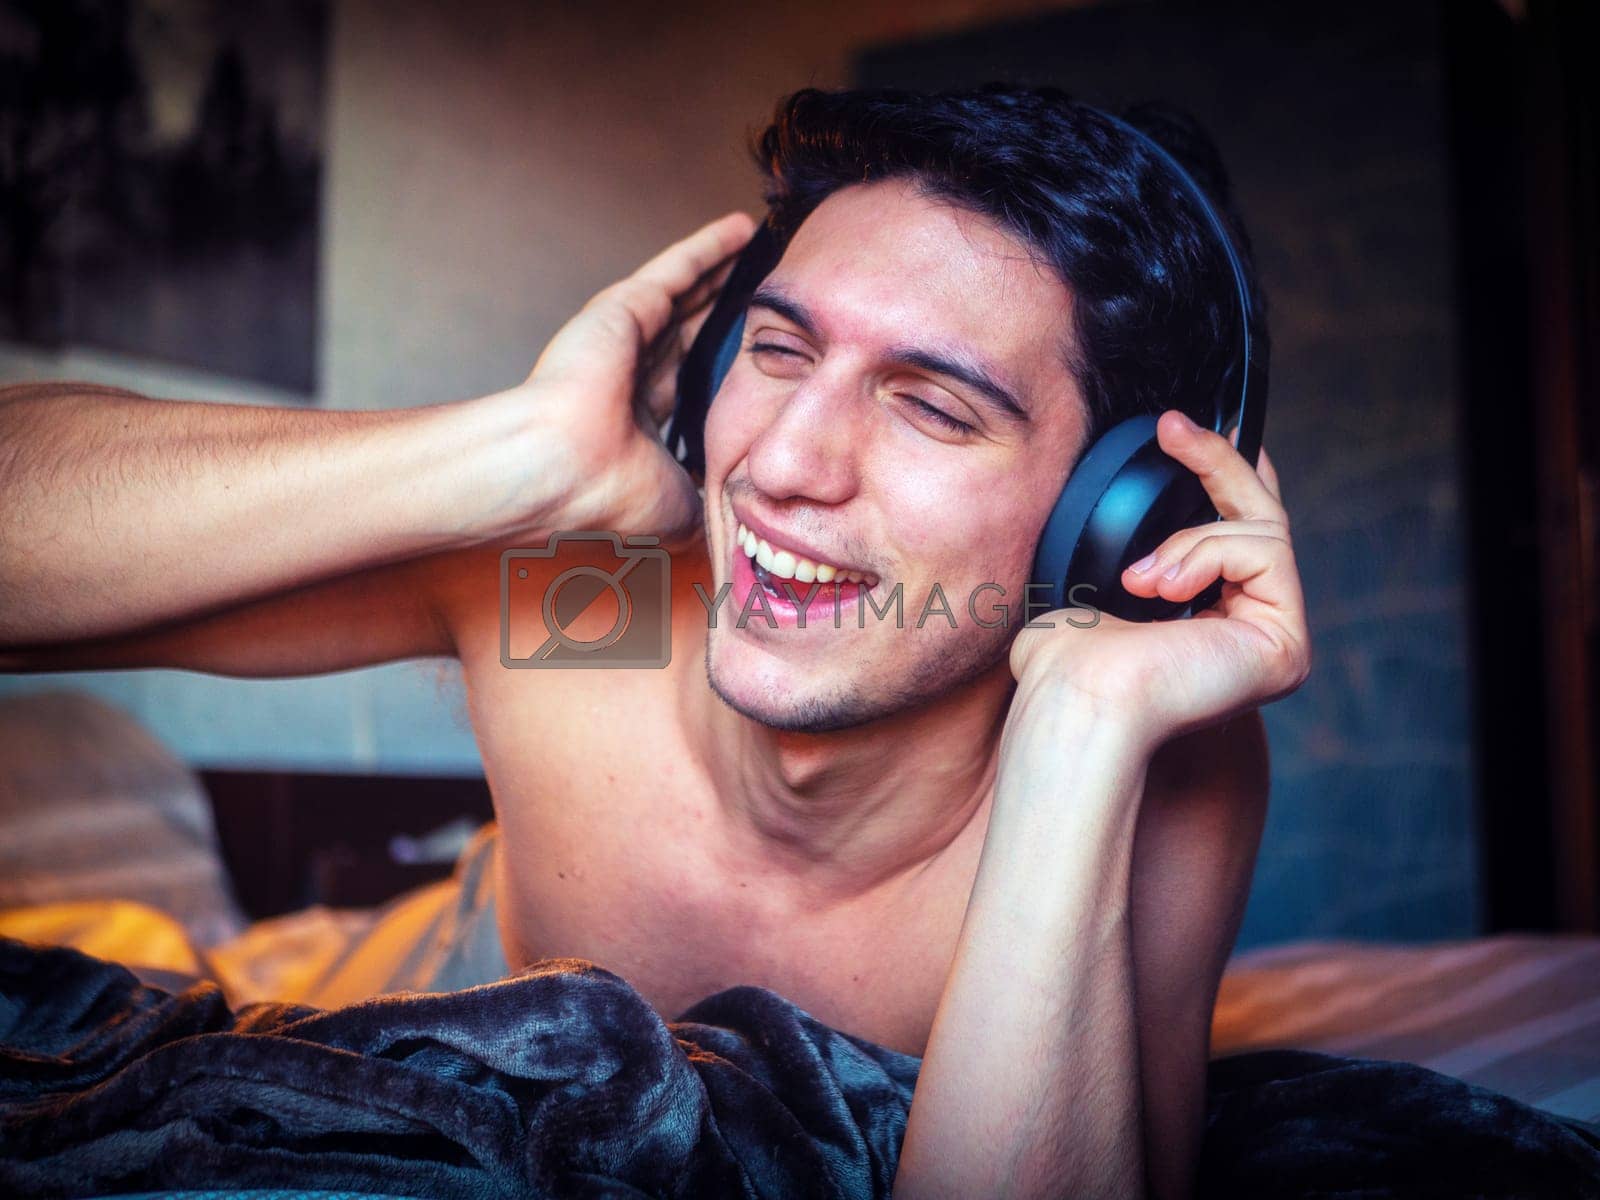 Royalty free image of Young Man Using Headphones Lying Alone On His Bed by artofphoto